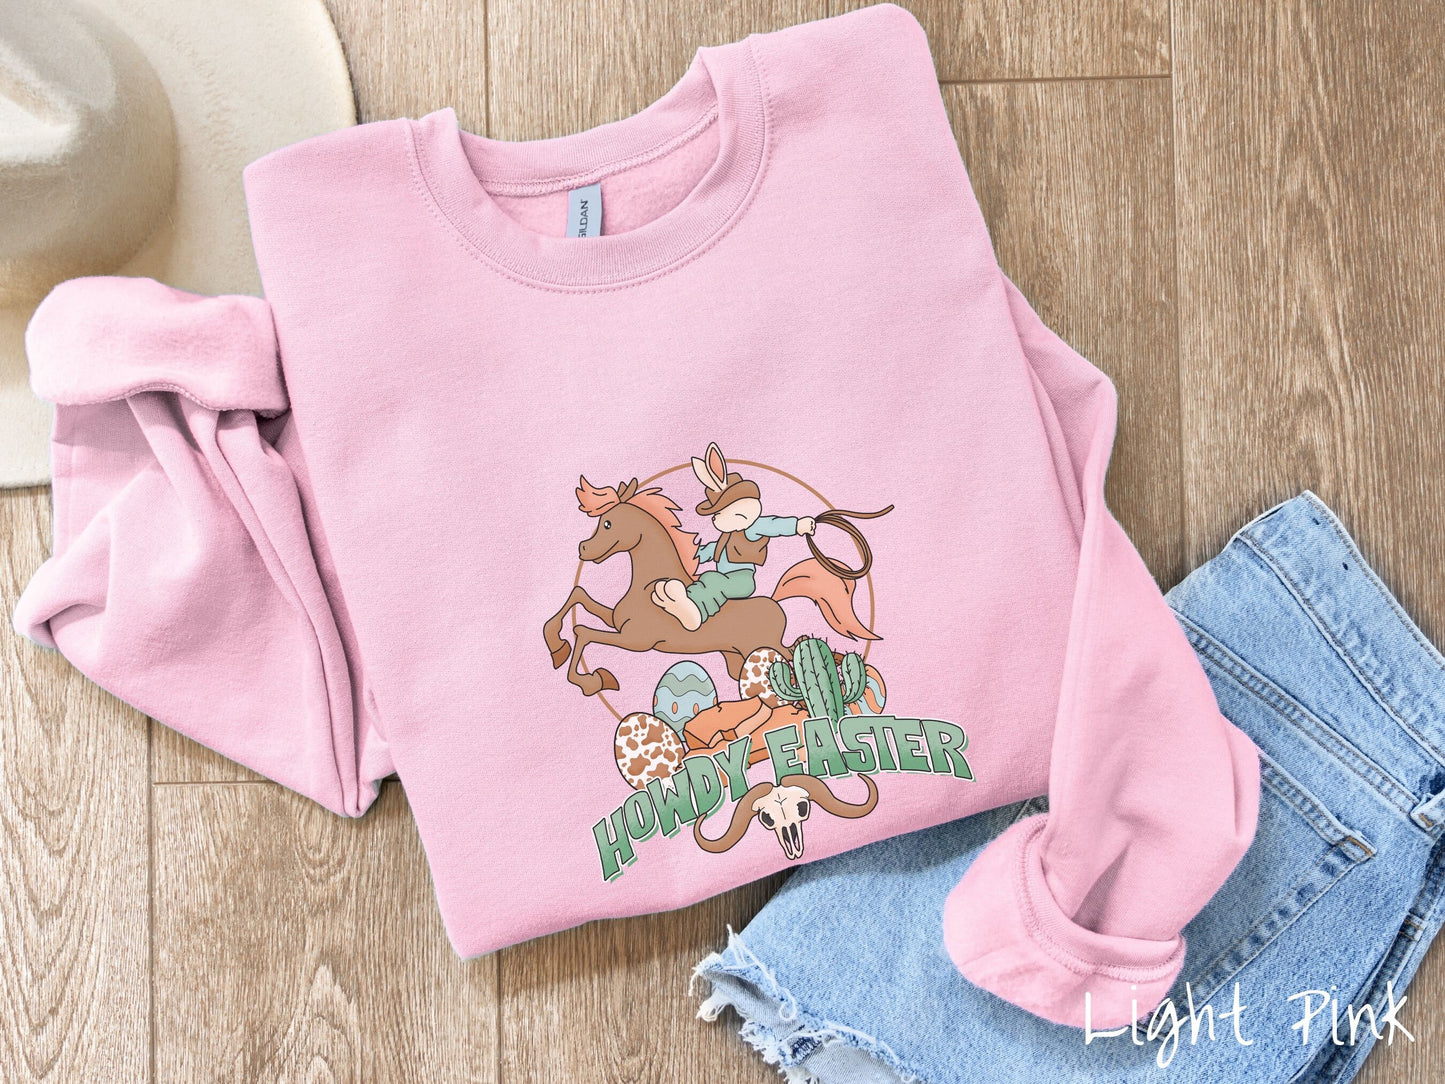 A cute, vintage light pink colored sweatshirt with a cowboy rabbit riding a bucking, brown horse while holding a lasso rope. Below is green text Howdy Easter along with colorful Easter eggs, a green cactus, and a horned bull skull.